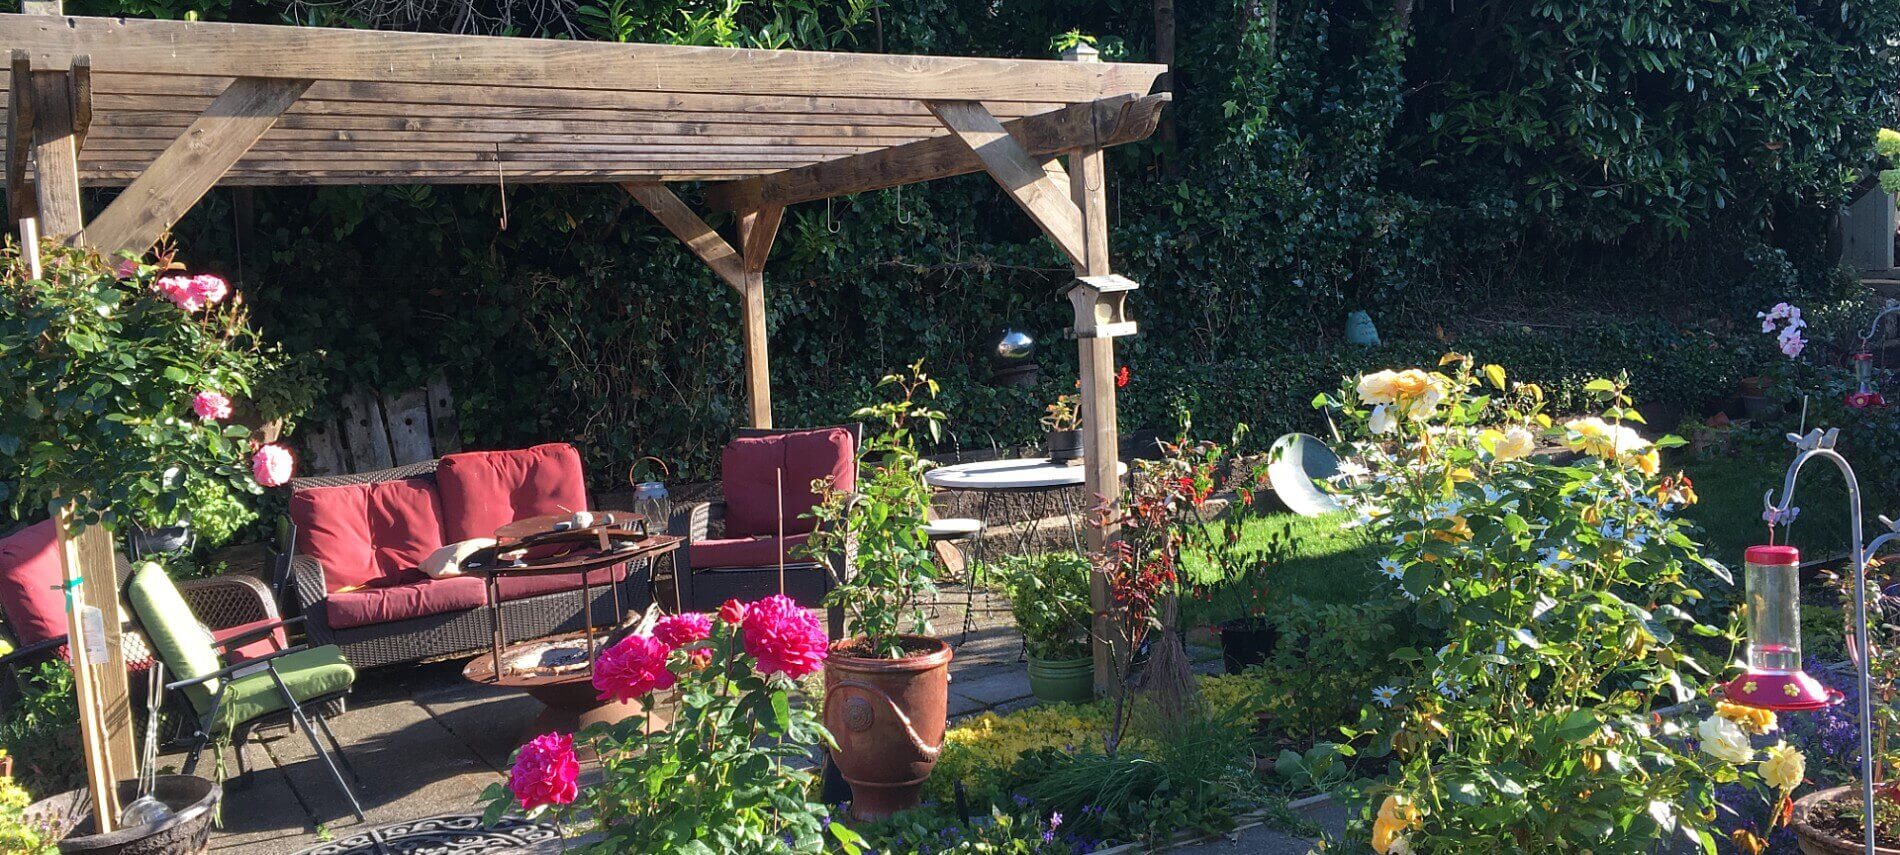 Outdoor area with a wooden pergola and comfortable seating surrounded by rose bushes.